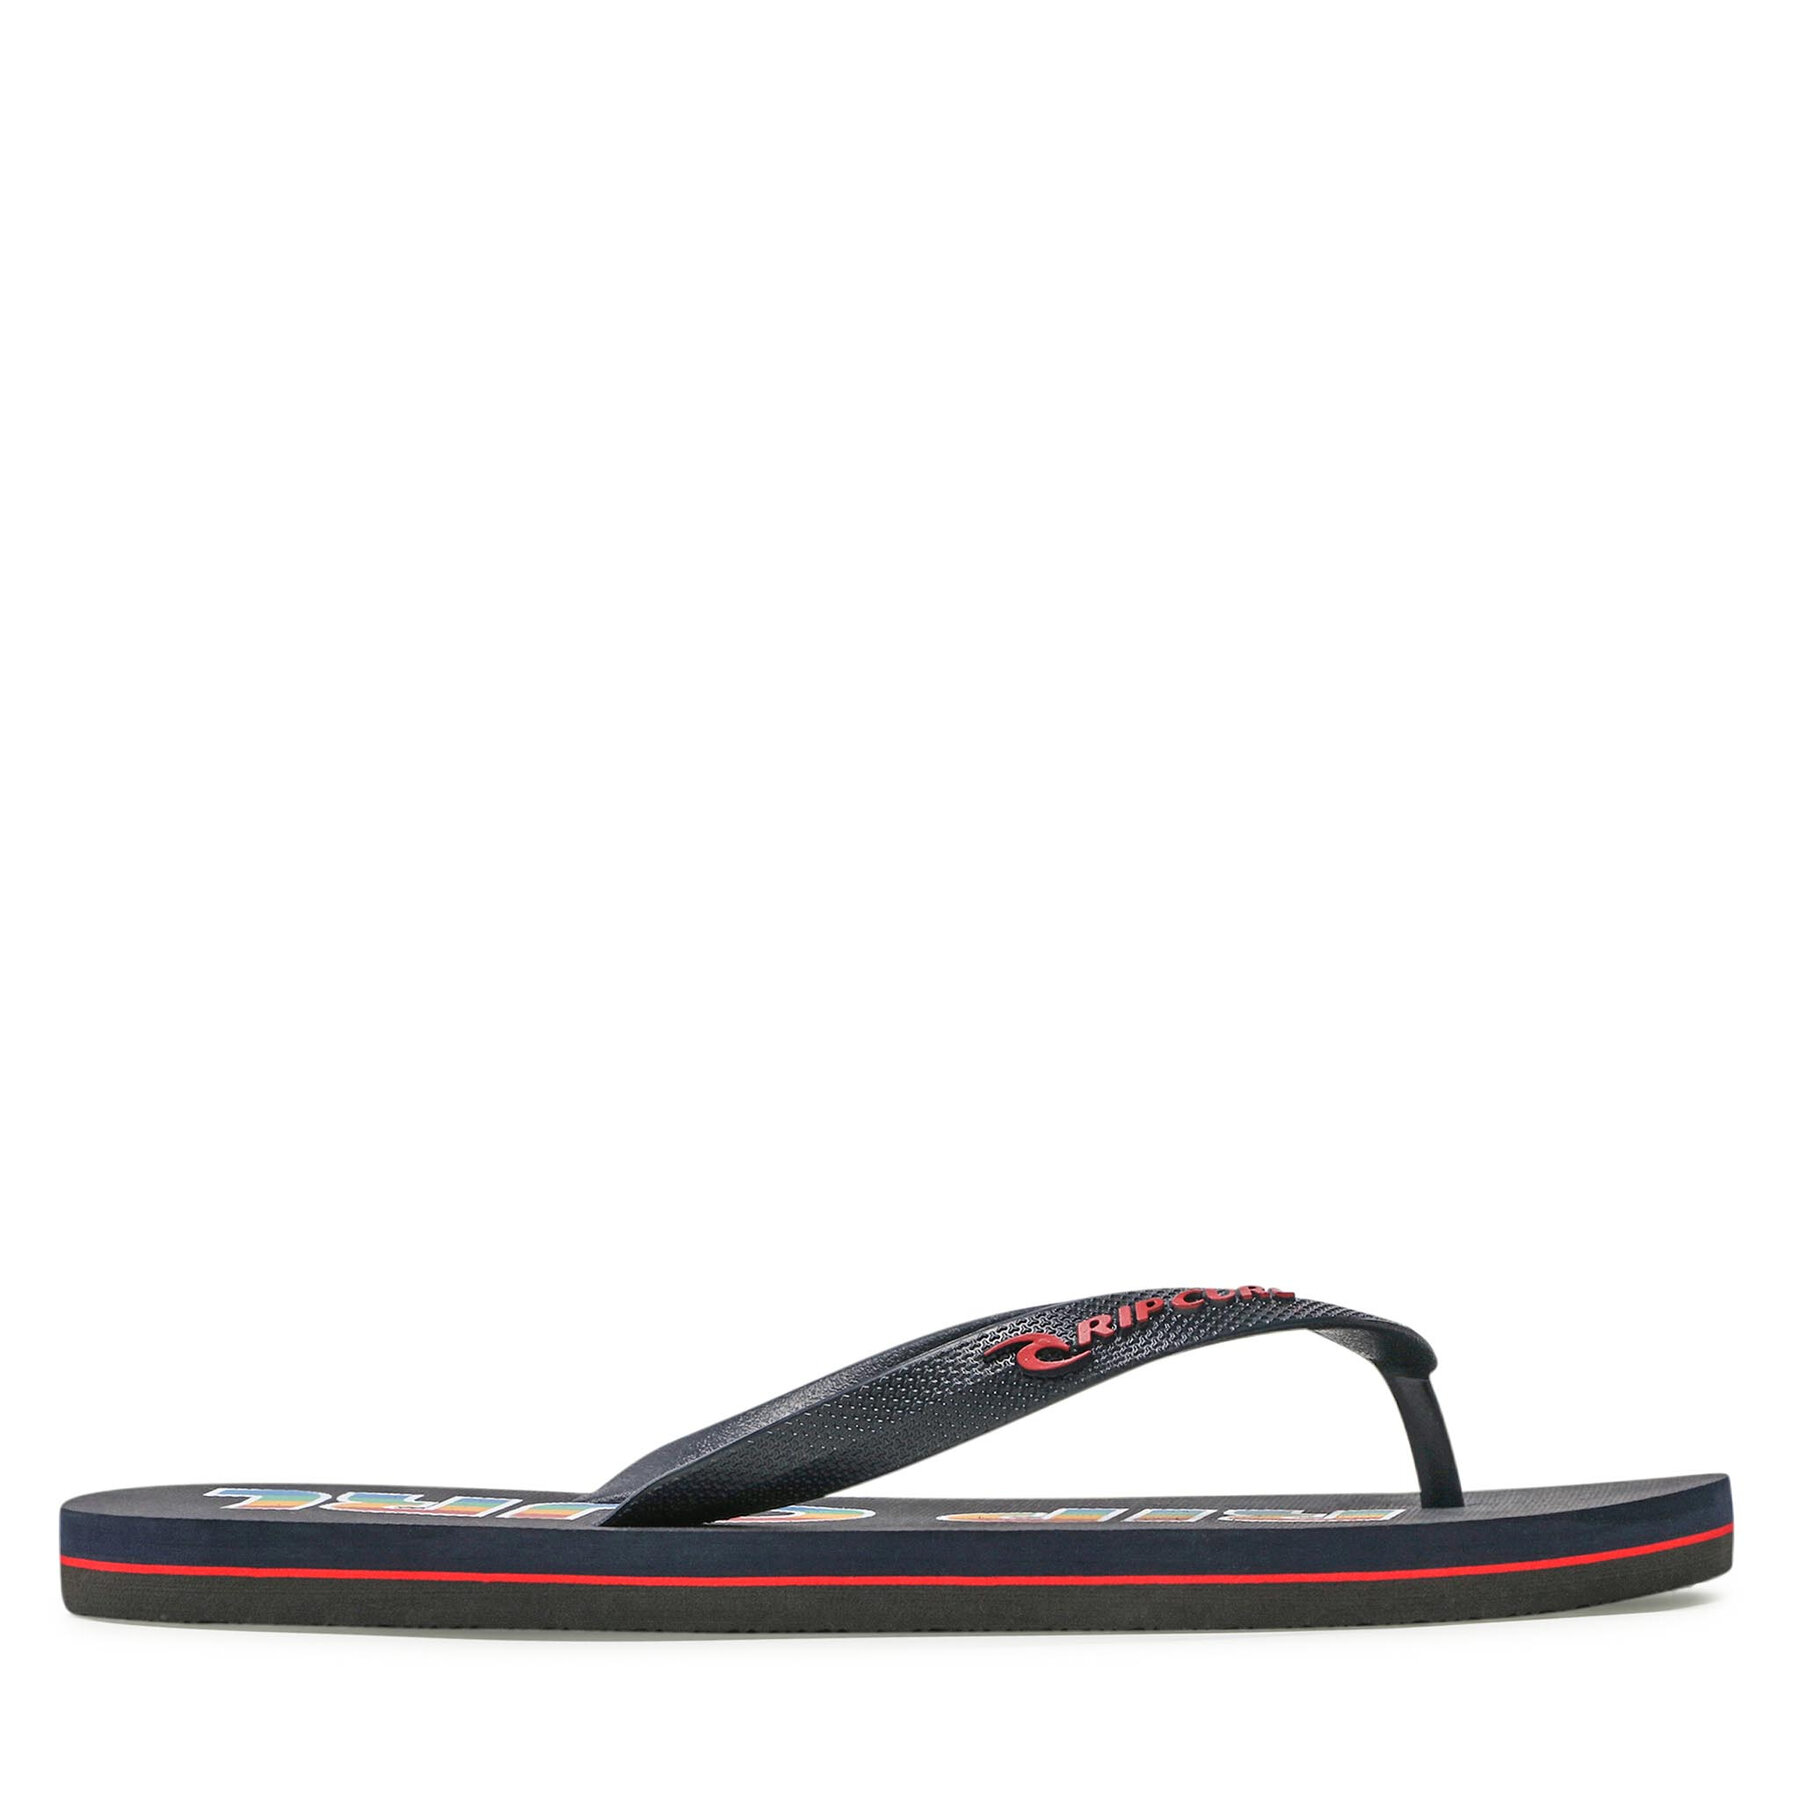 Zehentrenner Rip Curl Icons Open Toe TCTC81 Navy 49 von Rip Curl